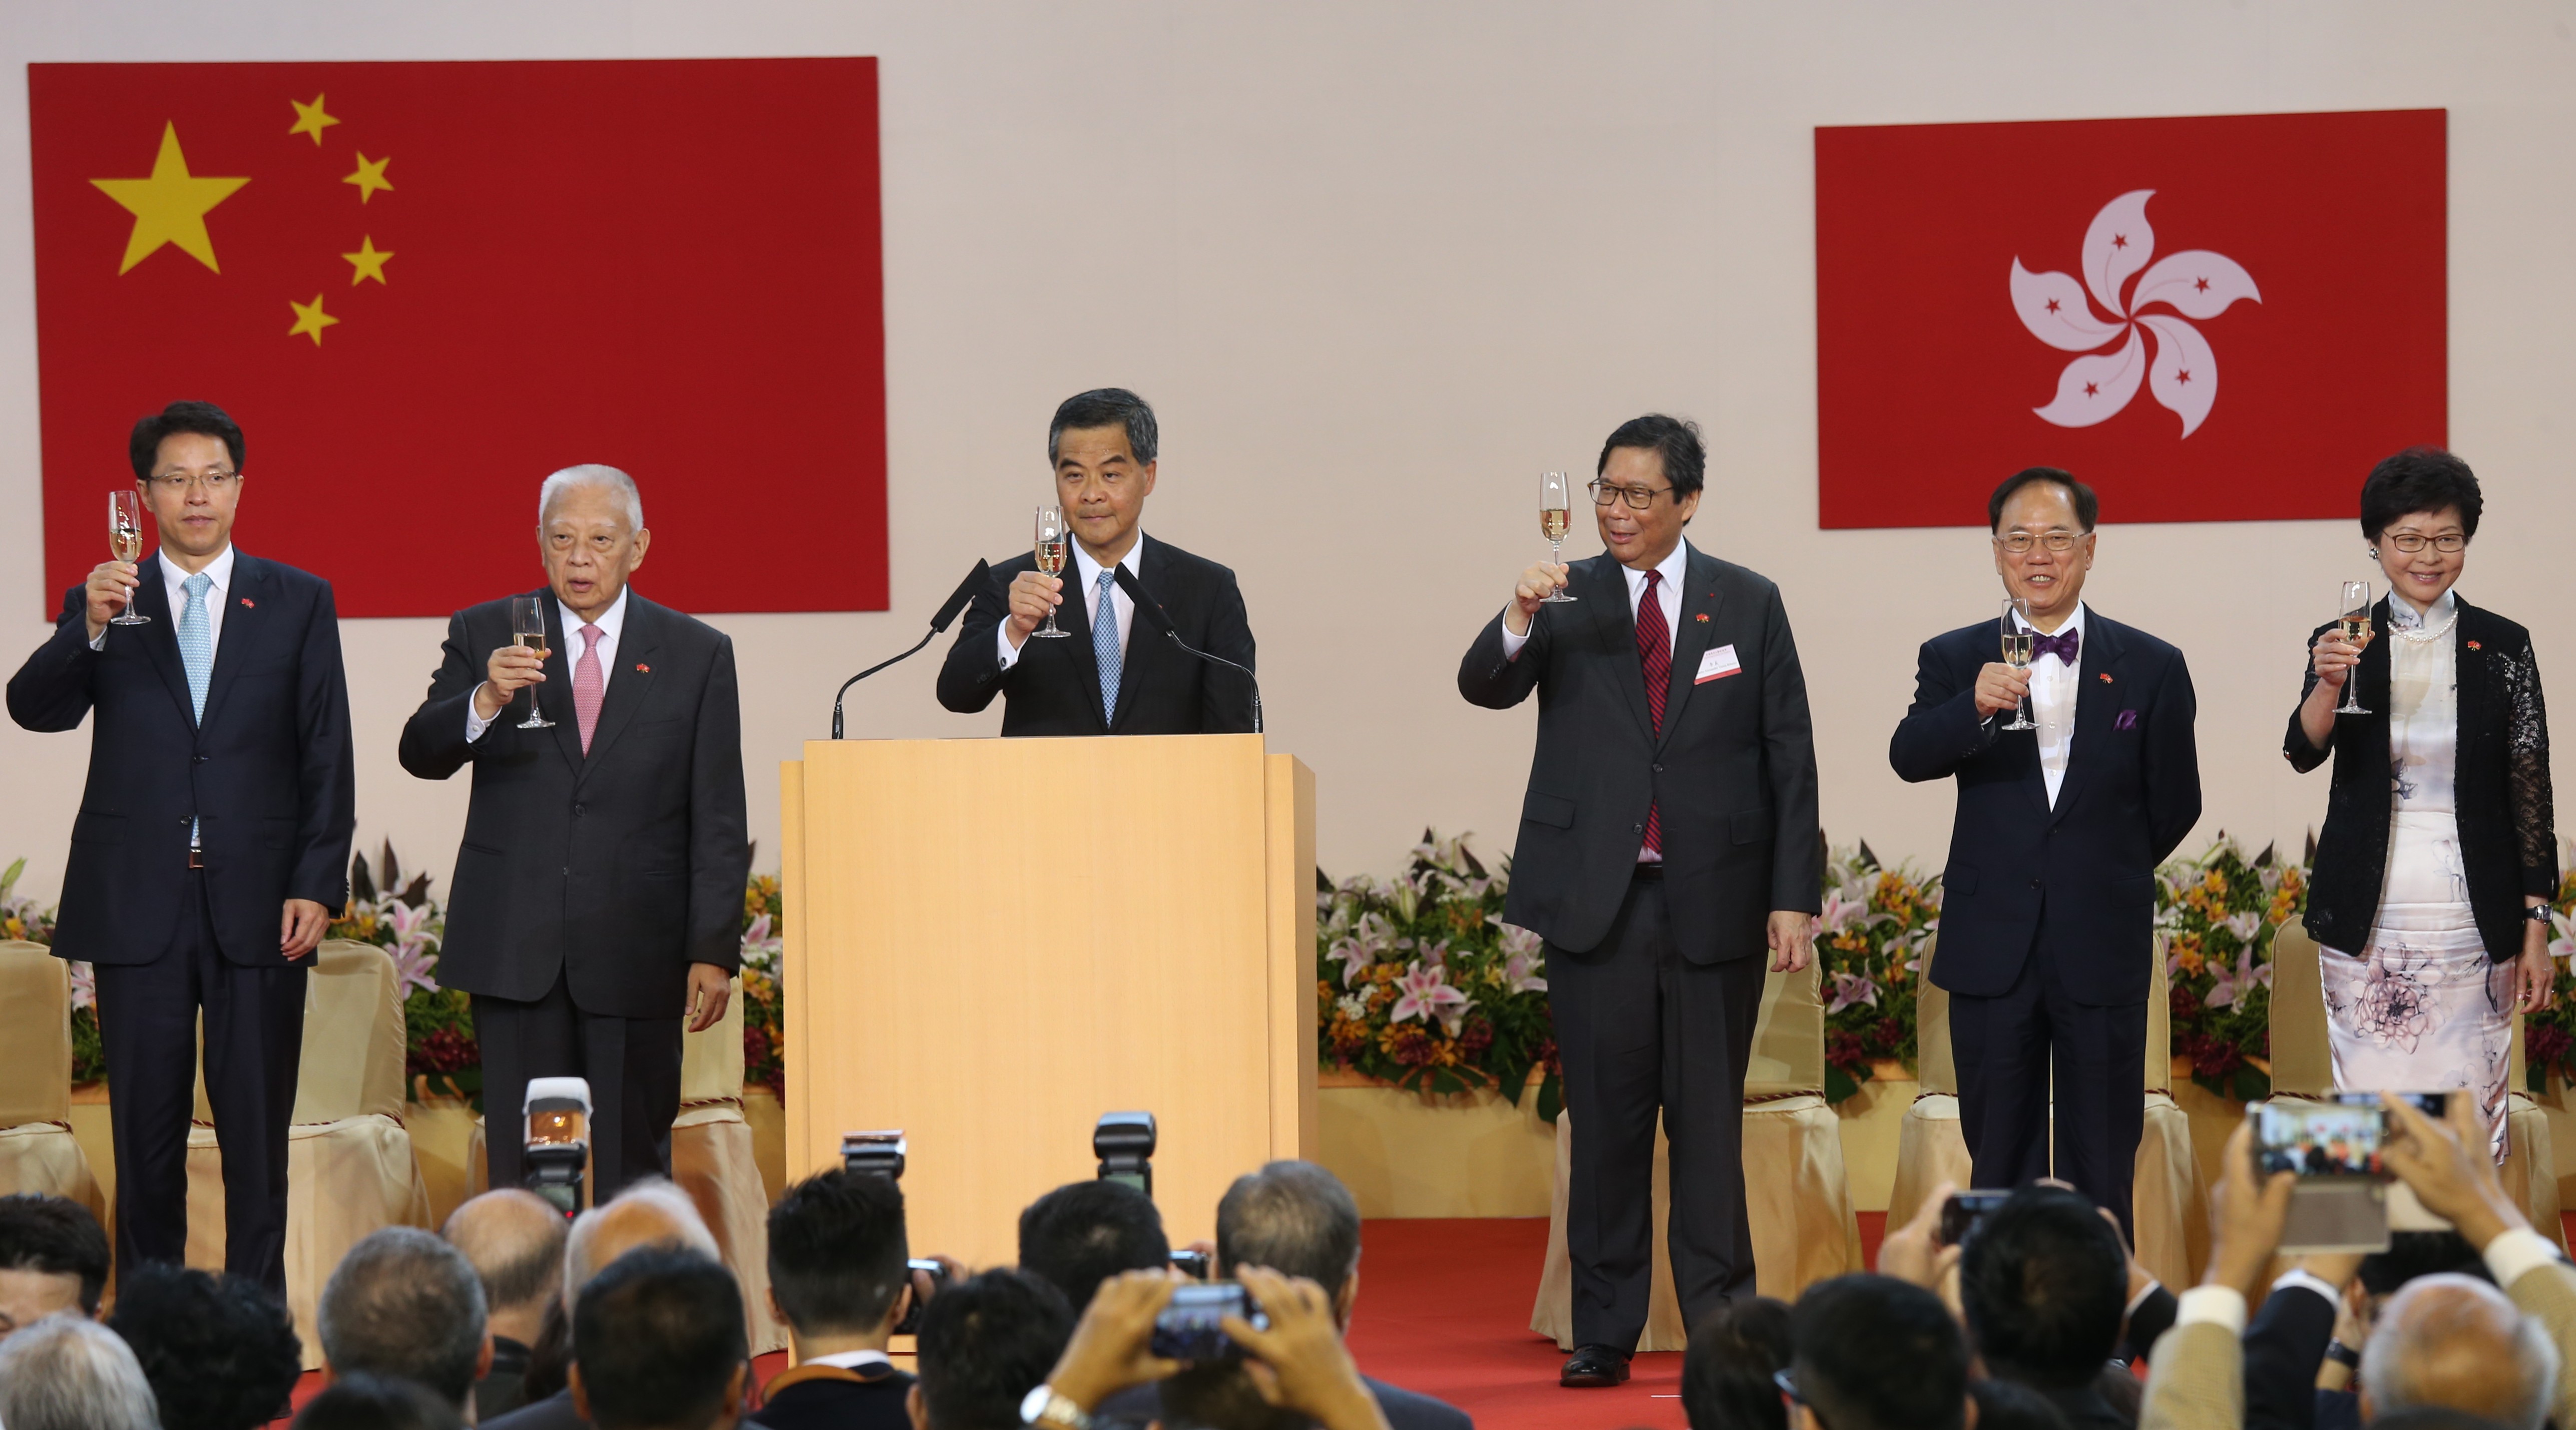 Chief Executive Leung Chun-ying officiates at the reception for the 19th anniversary of the establishment of the Hong Kong SAR last year, along with his predecessors Tung Chee-hwa (second left) and Donald Tsang (second right), and now chief executive-elect, Carrie Lam. Joining the toast is the liaison office director, Zhang Xiaoming (far left). Photo: Dickson Lee